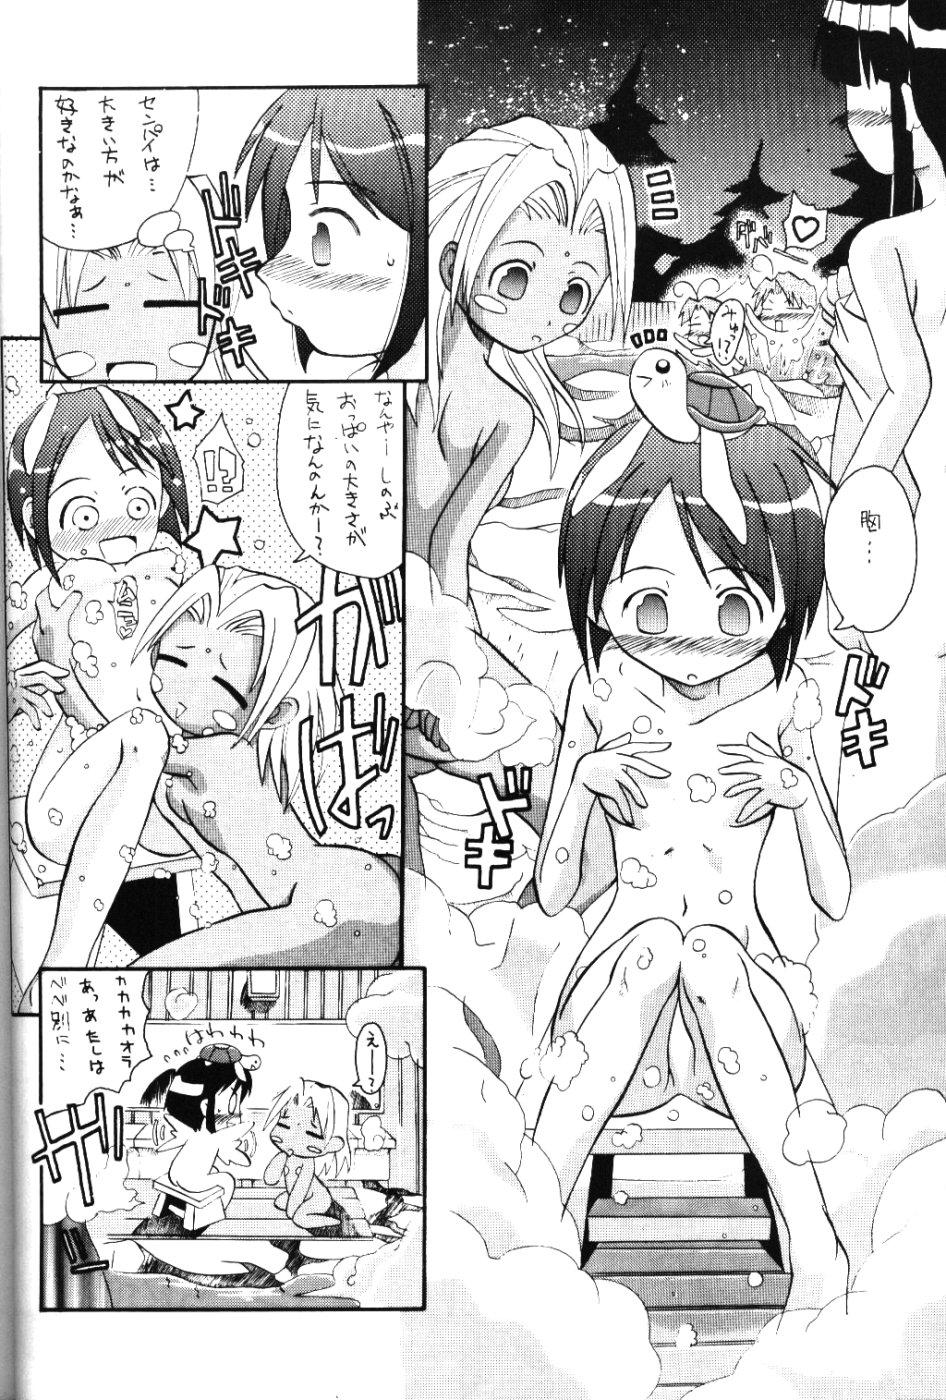 Buttplug Love Comi ～Love Communication - Love hina Colombian - Page 5